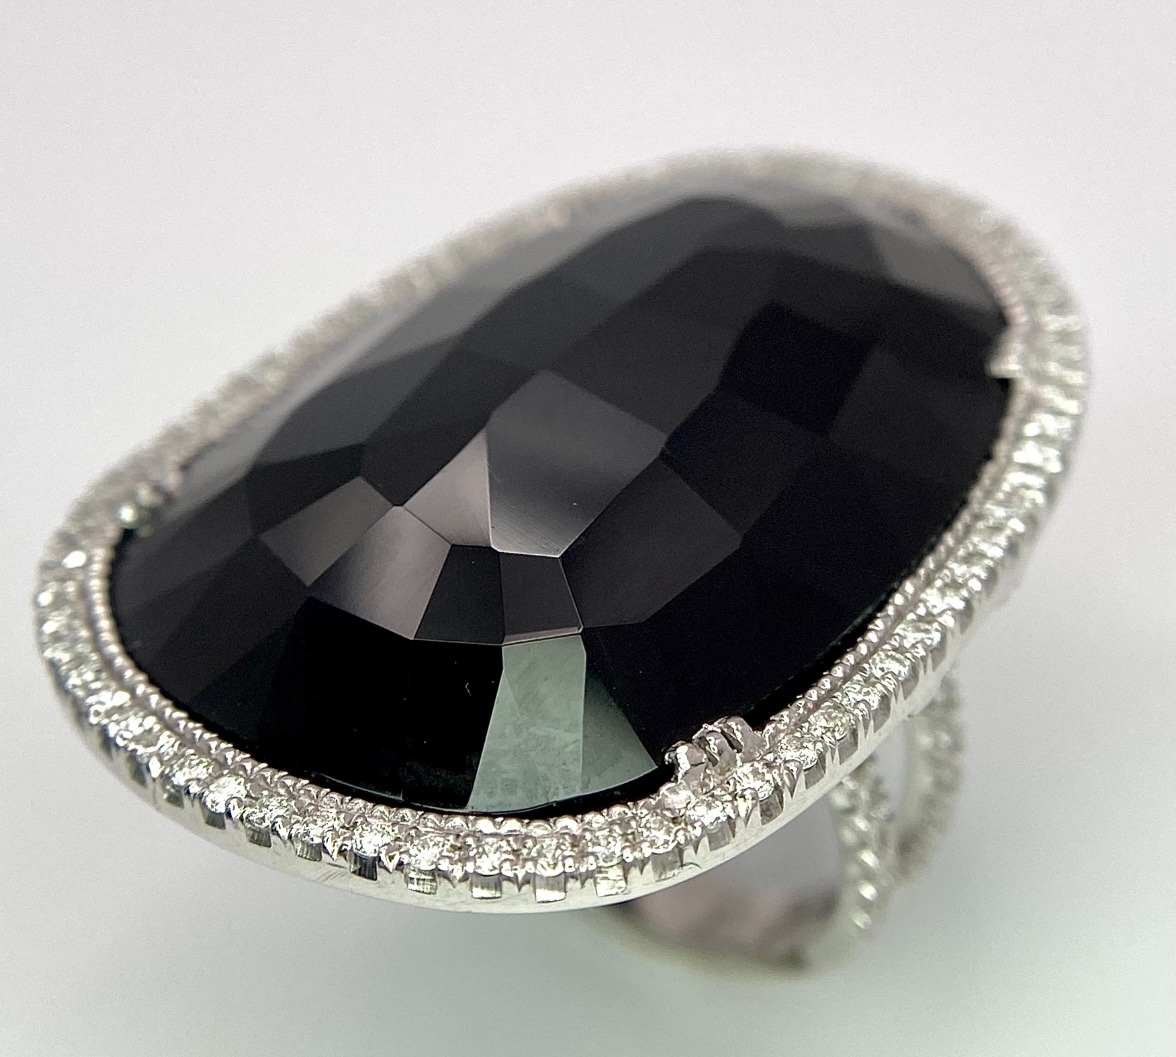 A Beautiful 18k White Gold Black Onyx and Diamond Ladies Dress Ring. Faceted black onyx with a - Image 7 of 8